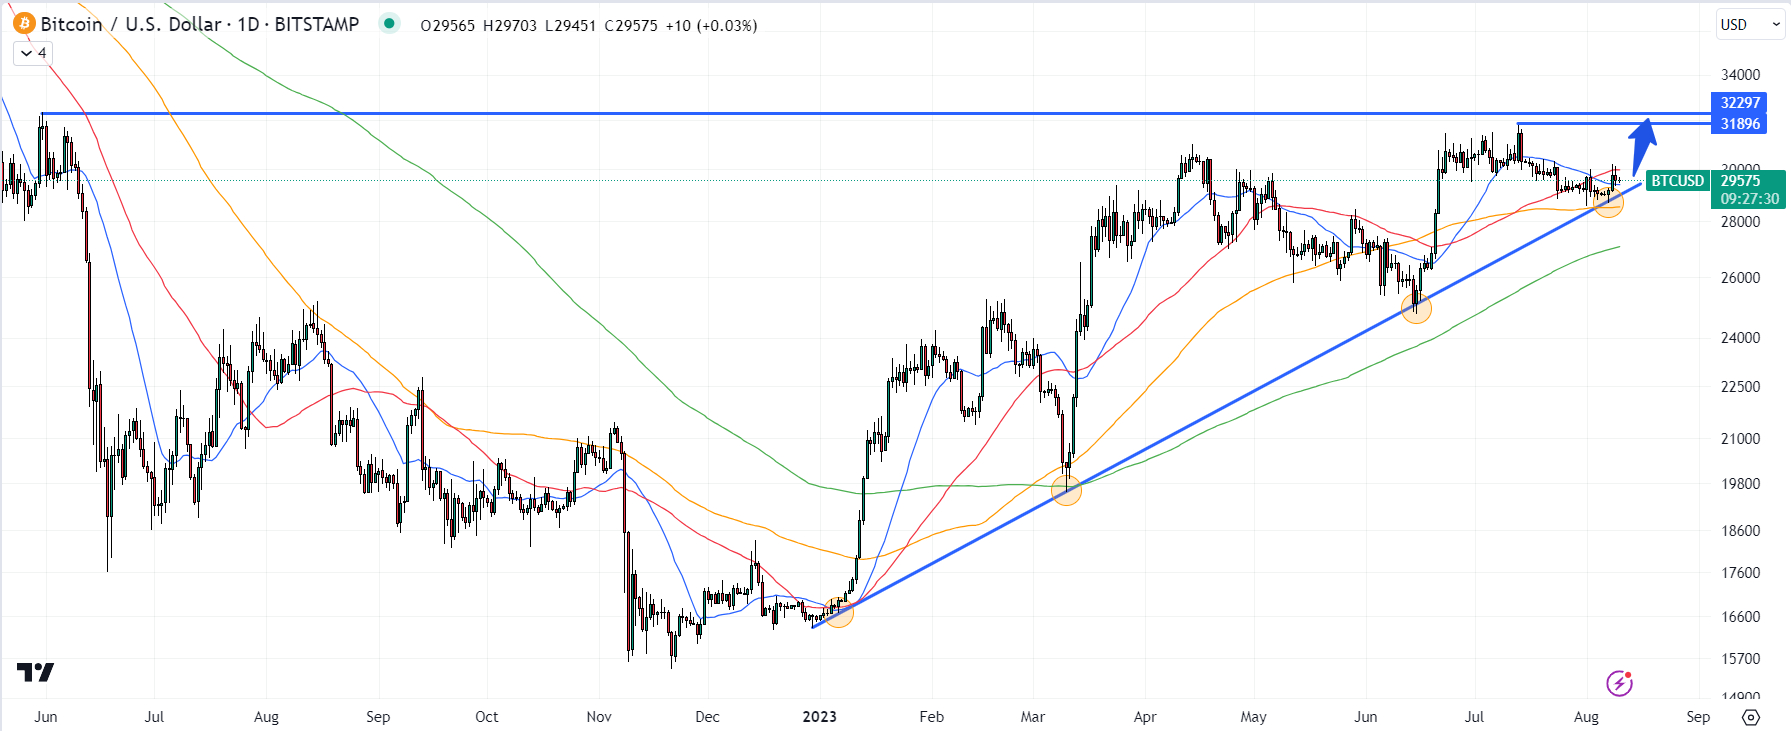 Bitcoin Price Prediction as Core Inflation Data is Announced – Can BTC Blast Past $30,000?